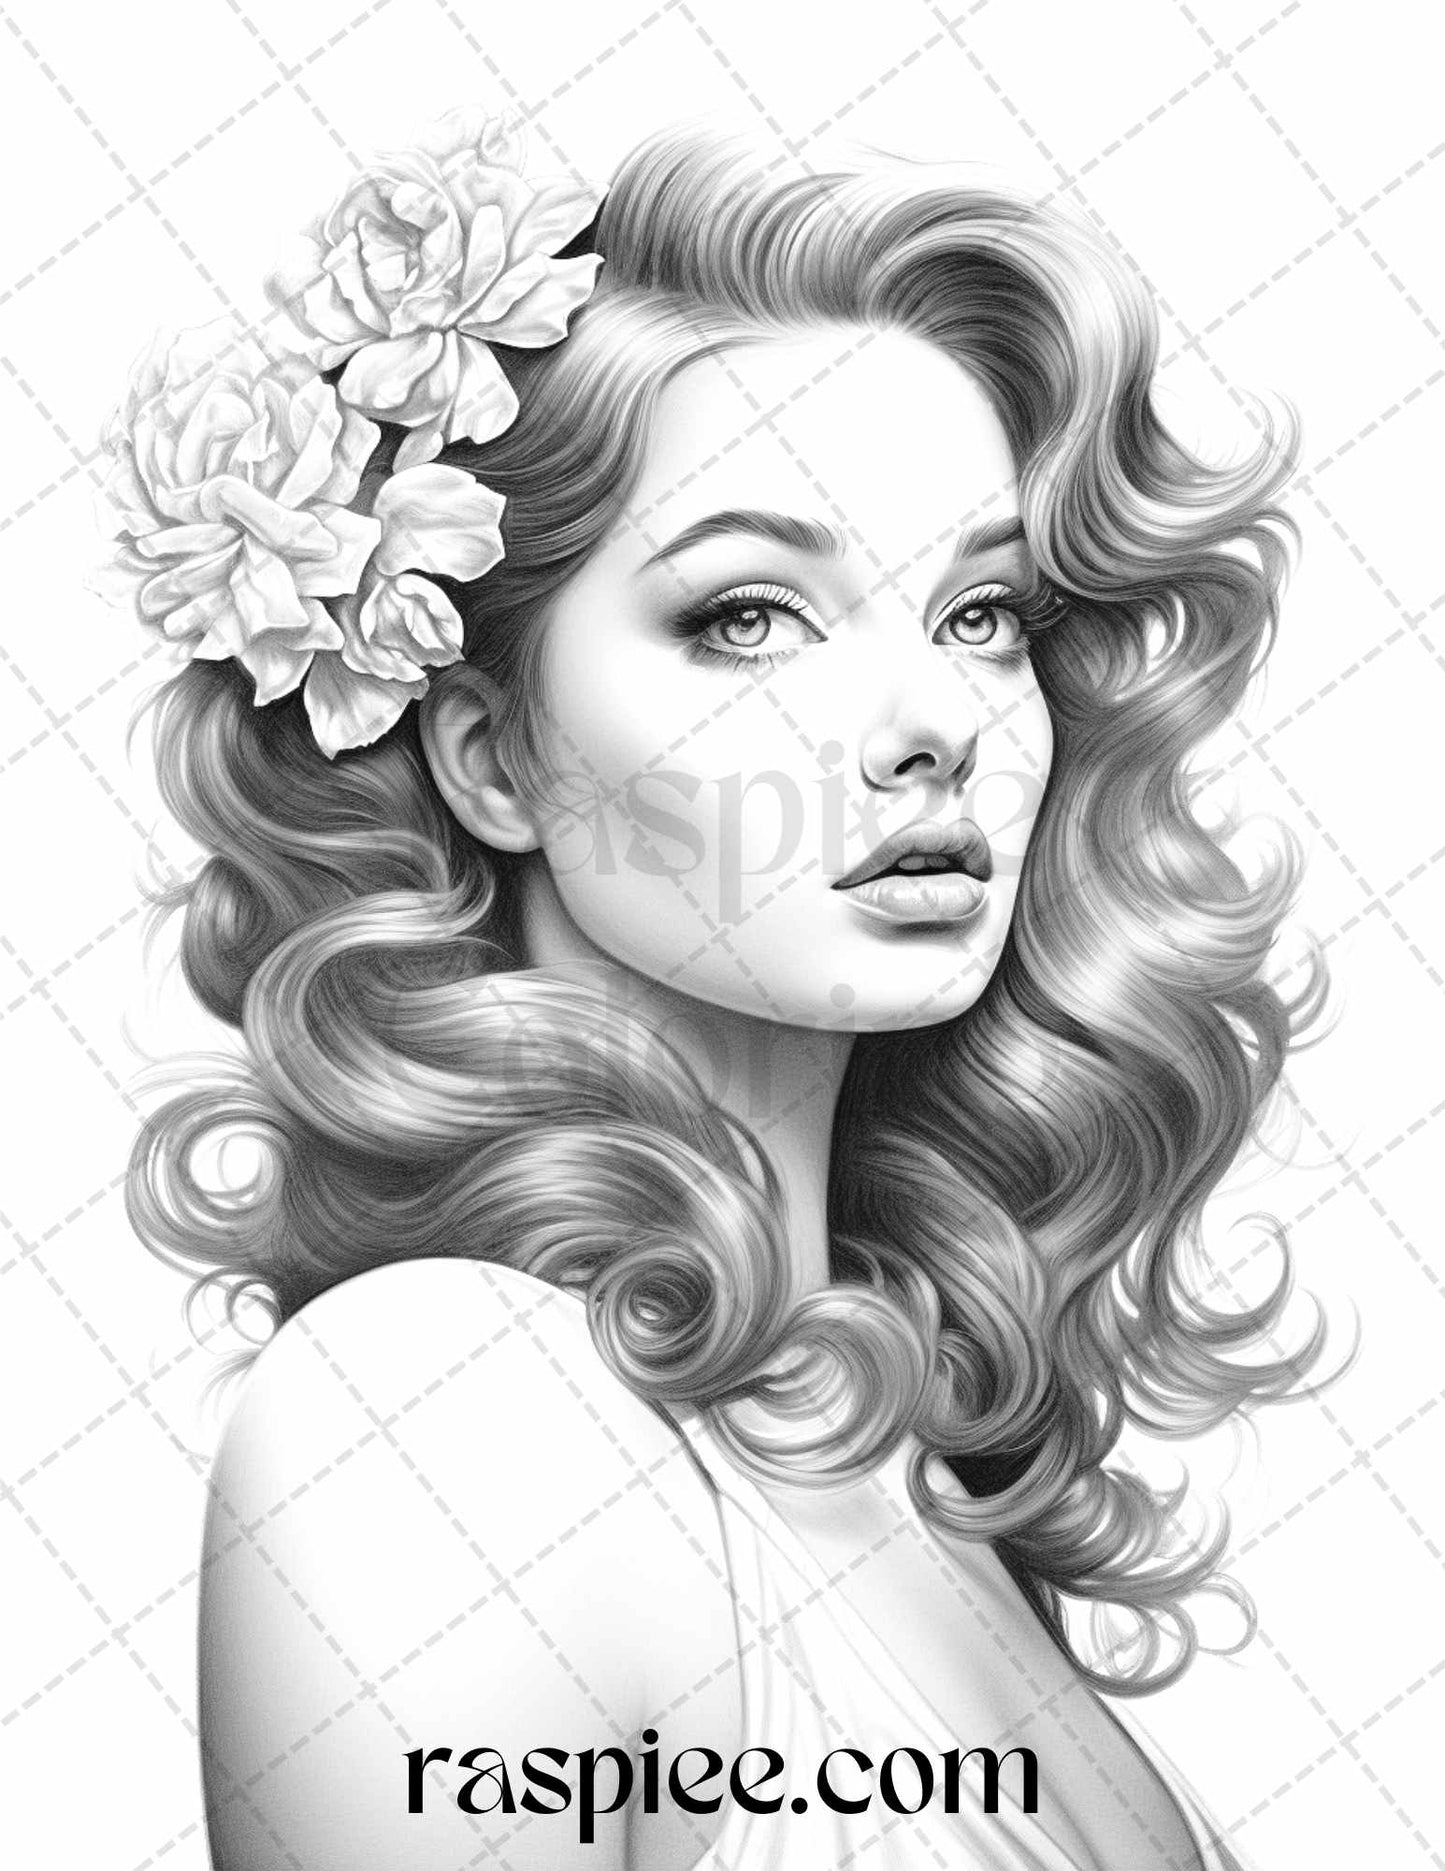 50 Vintage Pin Up Girls Grayscale Coloring Pages Printable for Adults, PDF File Instant Download - raspiee